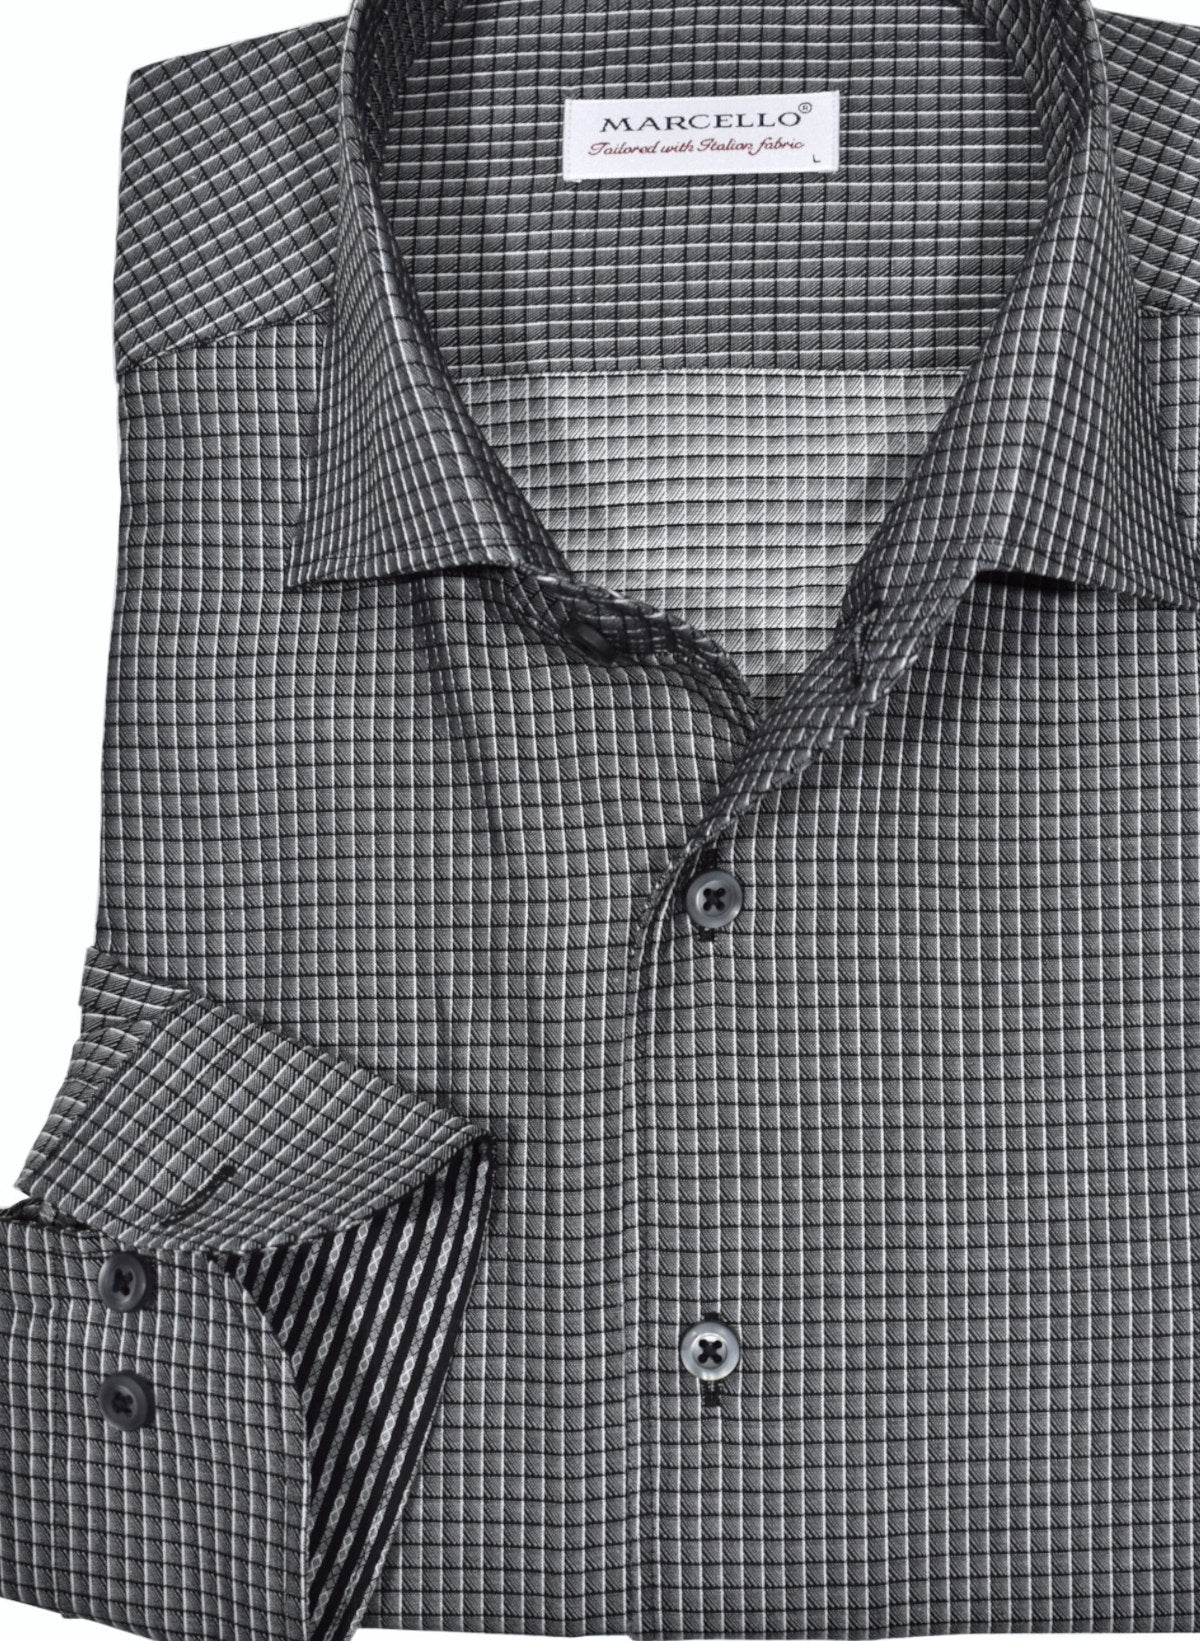 The ultimate, Marcello one piece roll collar, where the collar stands perfectly and the ultra cotton fabric feels incredible.  Shades of black and grey in a neat window pane pattern is fantastic for a dressy, rich sport shirt.  Pair it with any black or gray toned bottoms for a sharp debonair image.   Classic shaped fit.